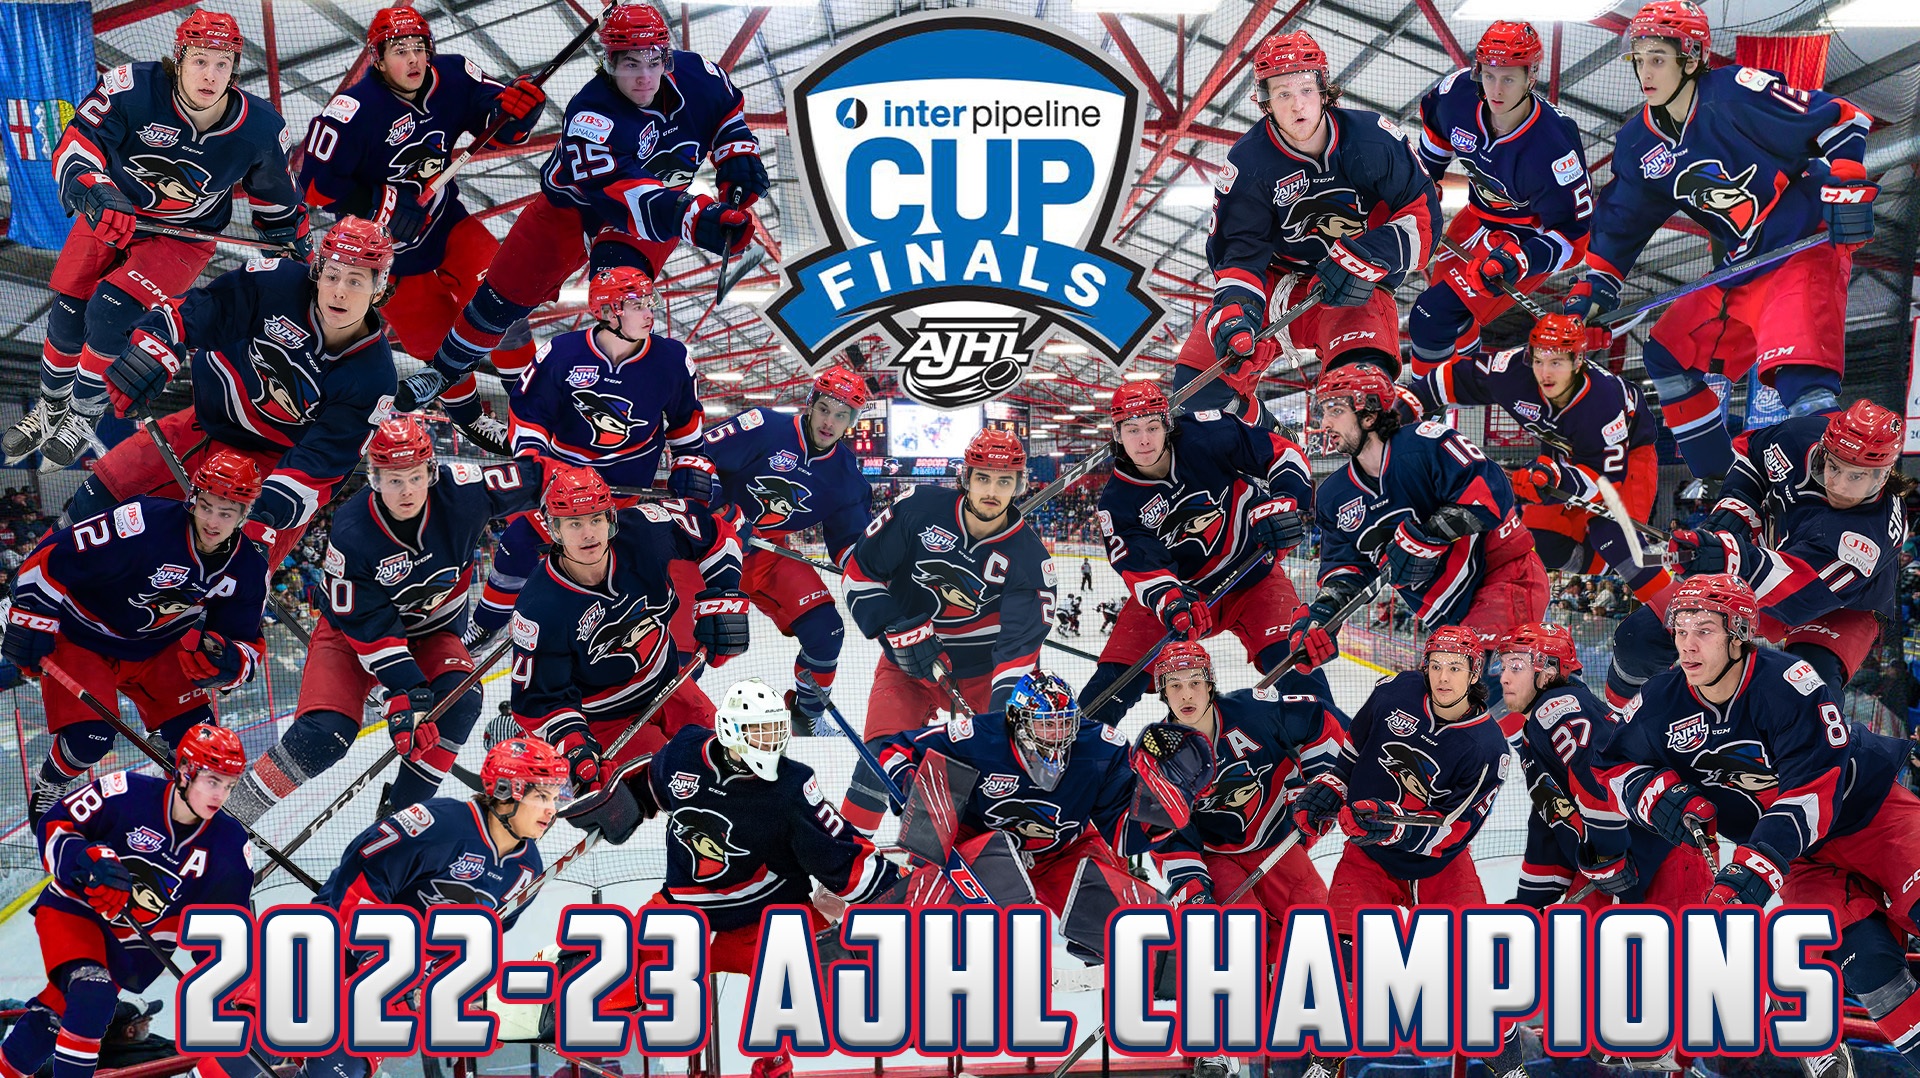 Holy Cross M. Hockey on X: Congratulations to @HCrossMHockey commits Devin  Phillips and Wes Turner on winning @TheAJHL championship last weekend with  the @BrooksBandits. They move on to the national tournament, the #